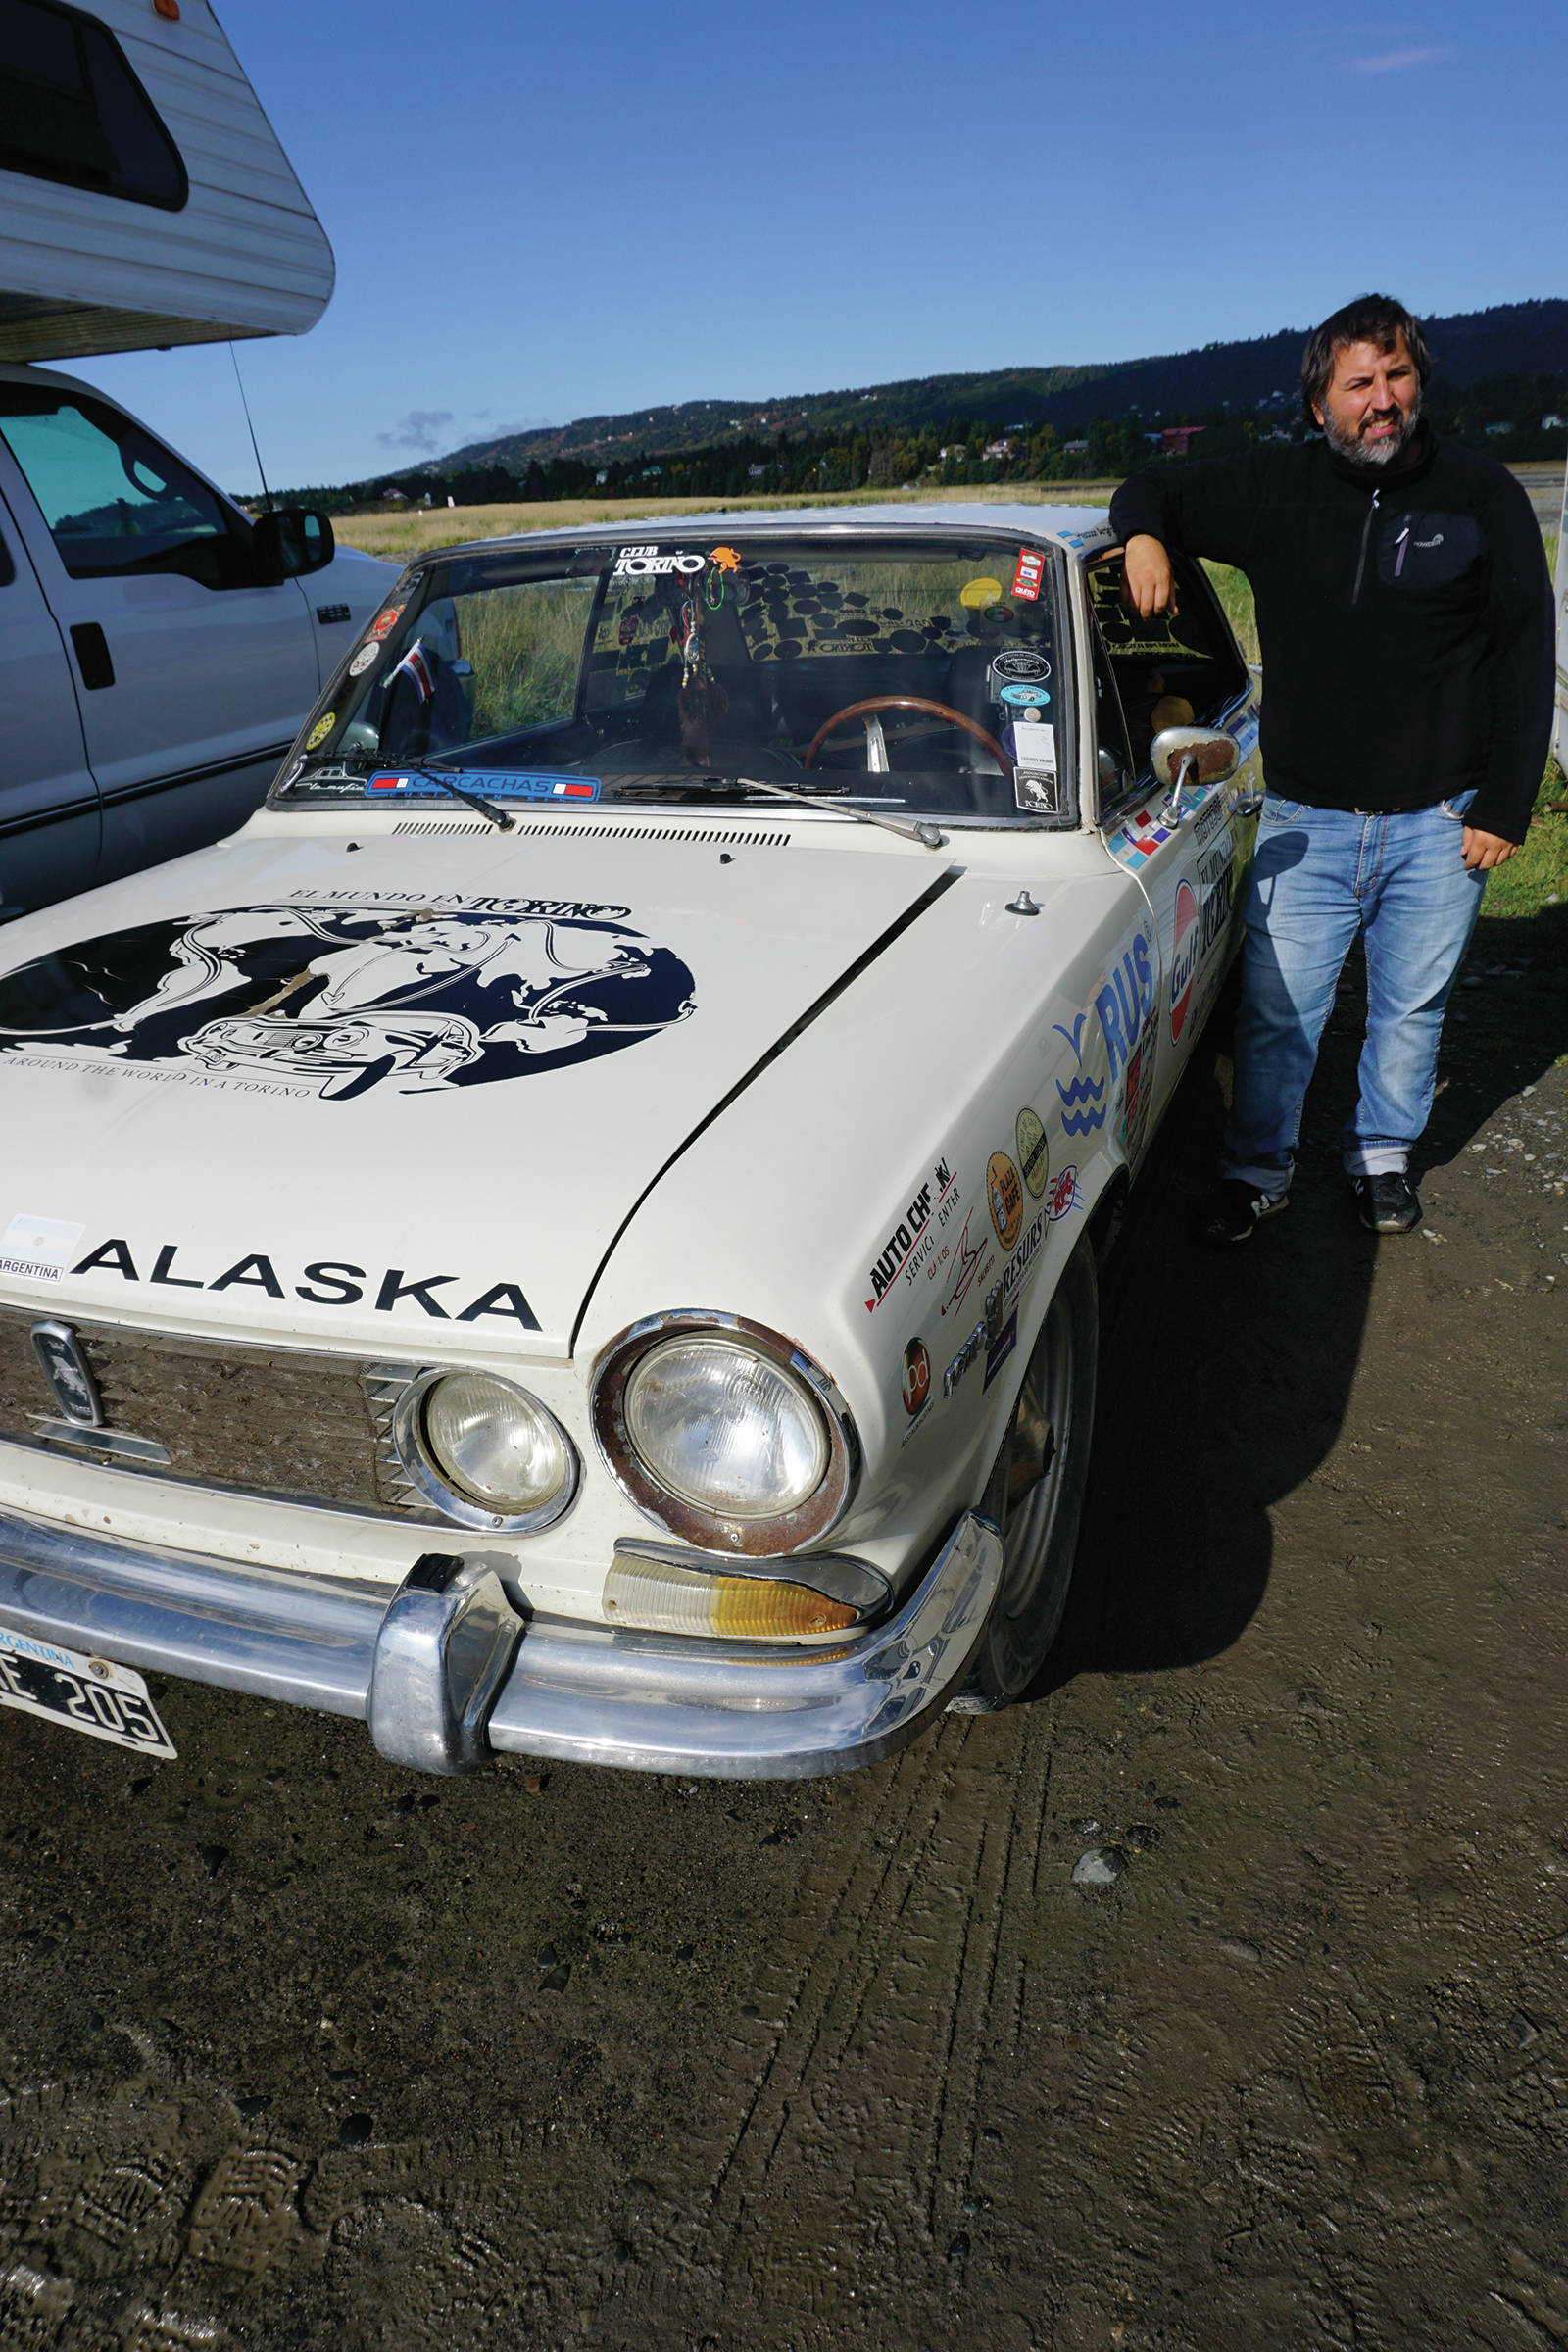 Just a little drive Héctor Argiró stands by his 1969 Torino at on Tuesday, Sept. 16, 2019, at Mariner Park on the Homer Spit in Homer, Alaska. Starting on Nov. 24, 2016, Argiró drove the Argentinian classic car from Buenos Aires to Ushuaia, Argentina, and north to Alaska through South America, Central America, Mexico, the western United States, and Canada. He plans to continue his trip through North America and then to Europe. For more about El Mundo en Torino (“Around the world in a Torino”), visit www.elmundoentorino.com. (Photo by Michael Armstrong/Homer News)